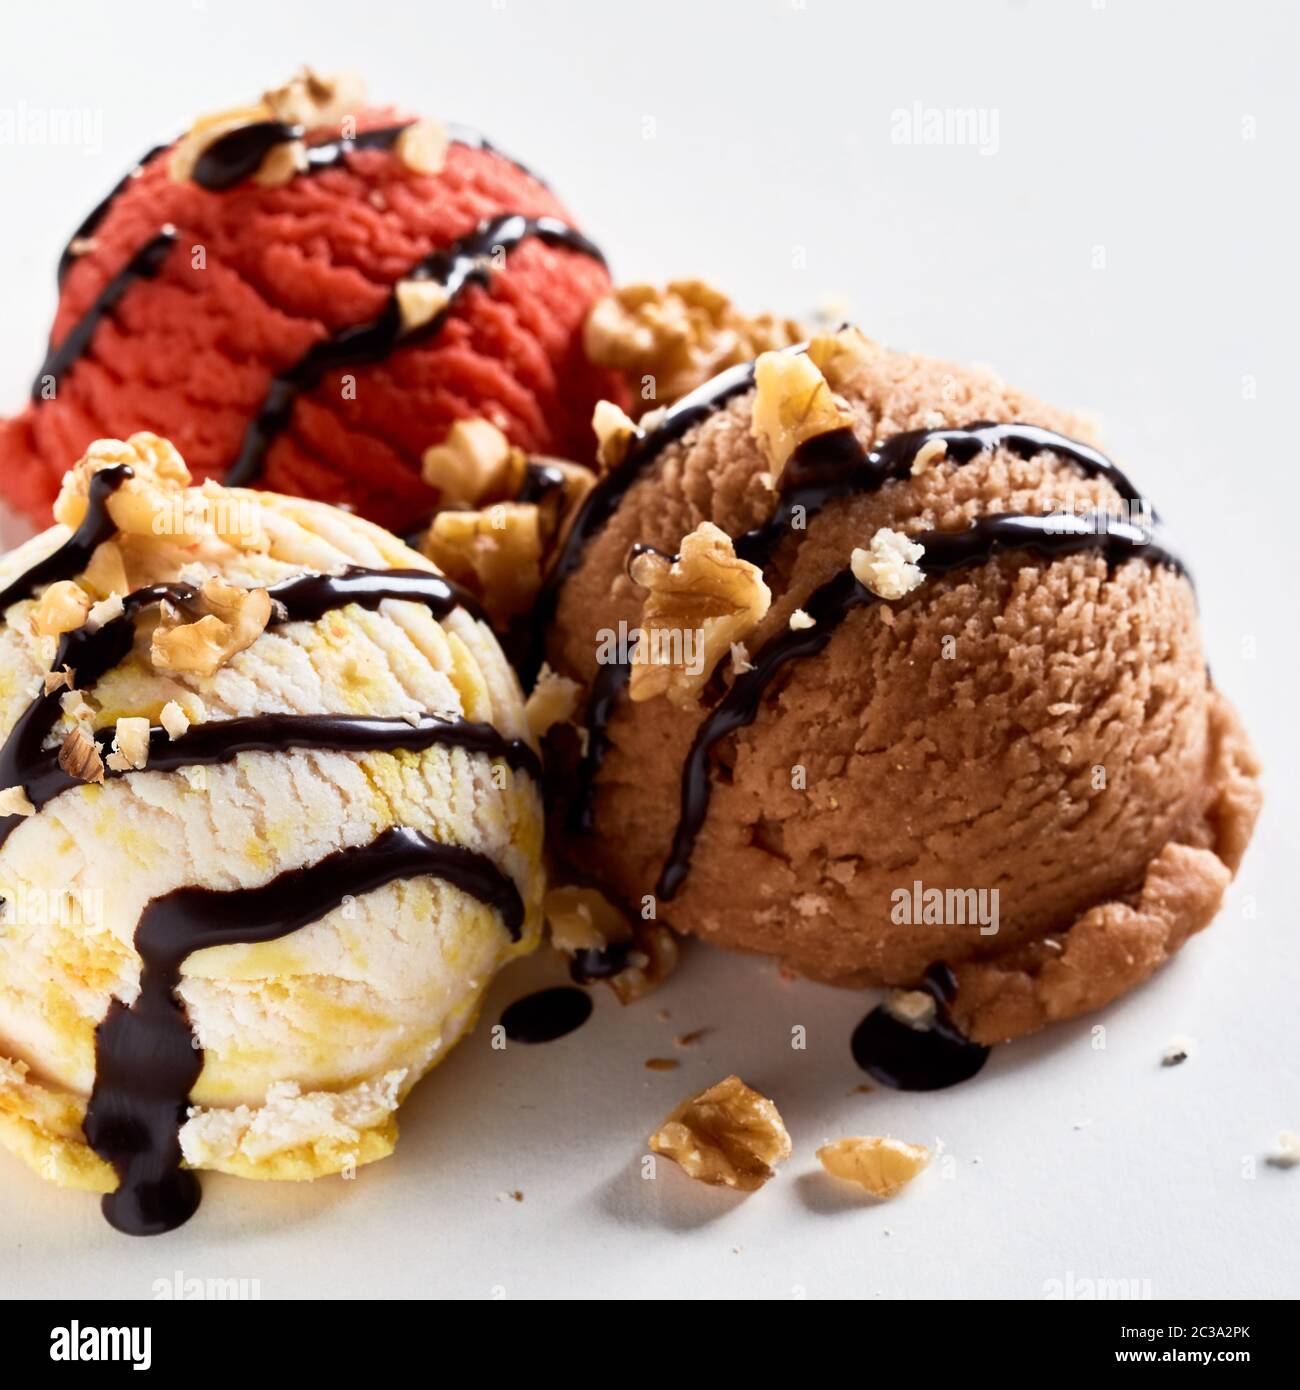 Three scoops of flavored frozen ice cream topped with chopped walnuts and drizzled chocolate in a close up view Stock Photo